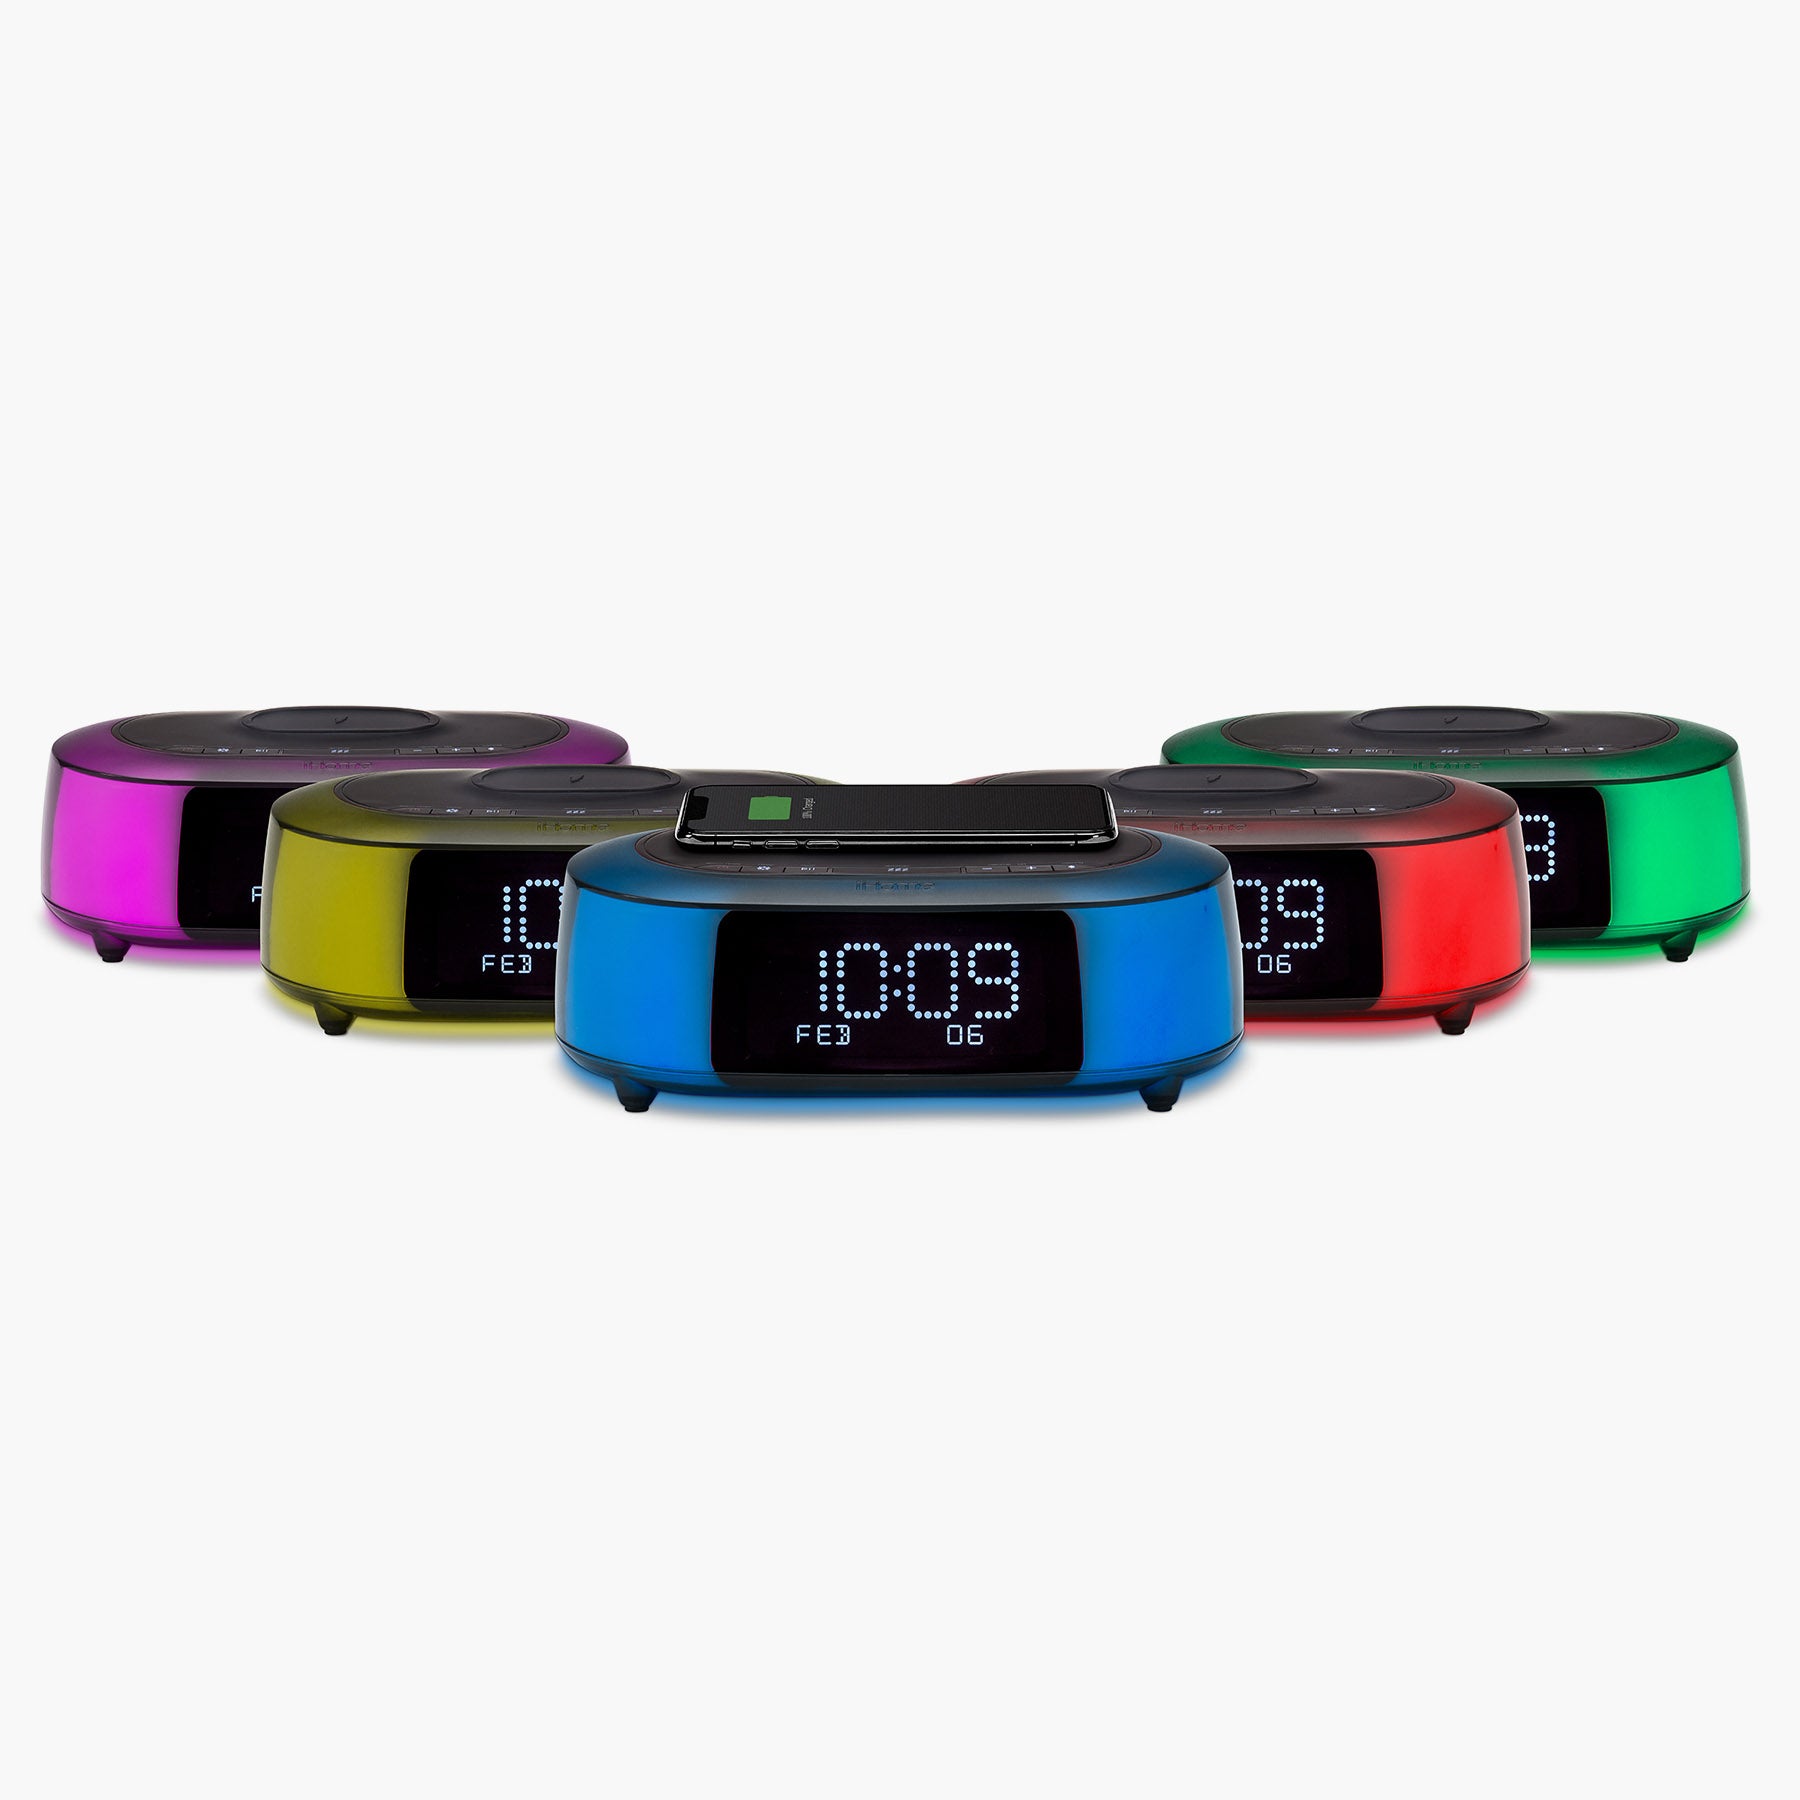 Wireless Charging Station with Color Changing Bluetooth Alarm Clock and USB Charging (iBTW281v2)